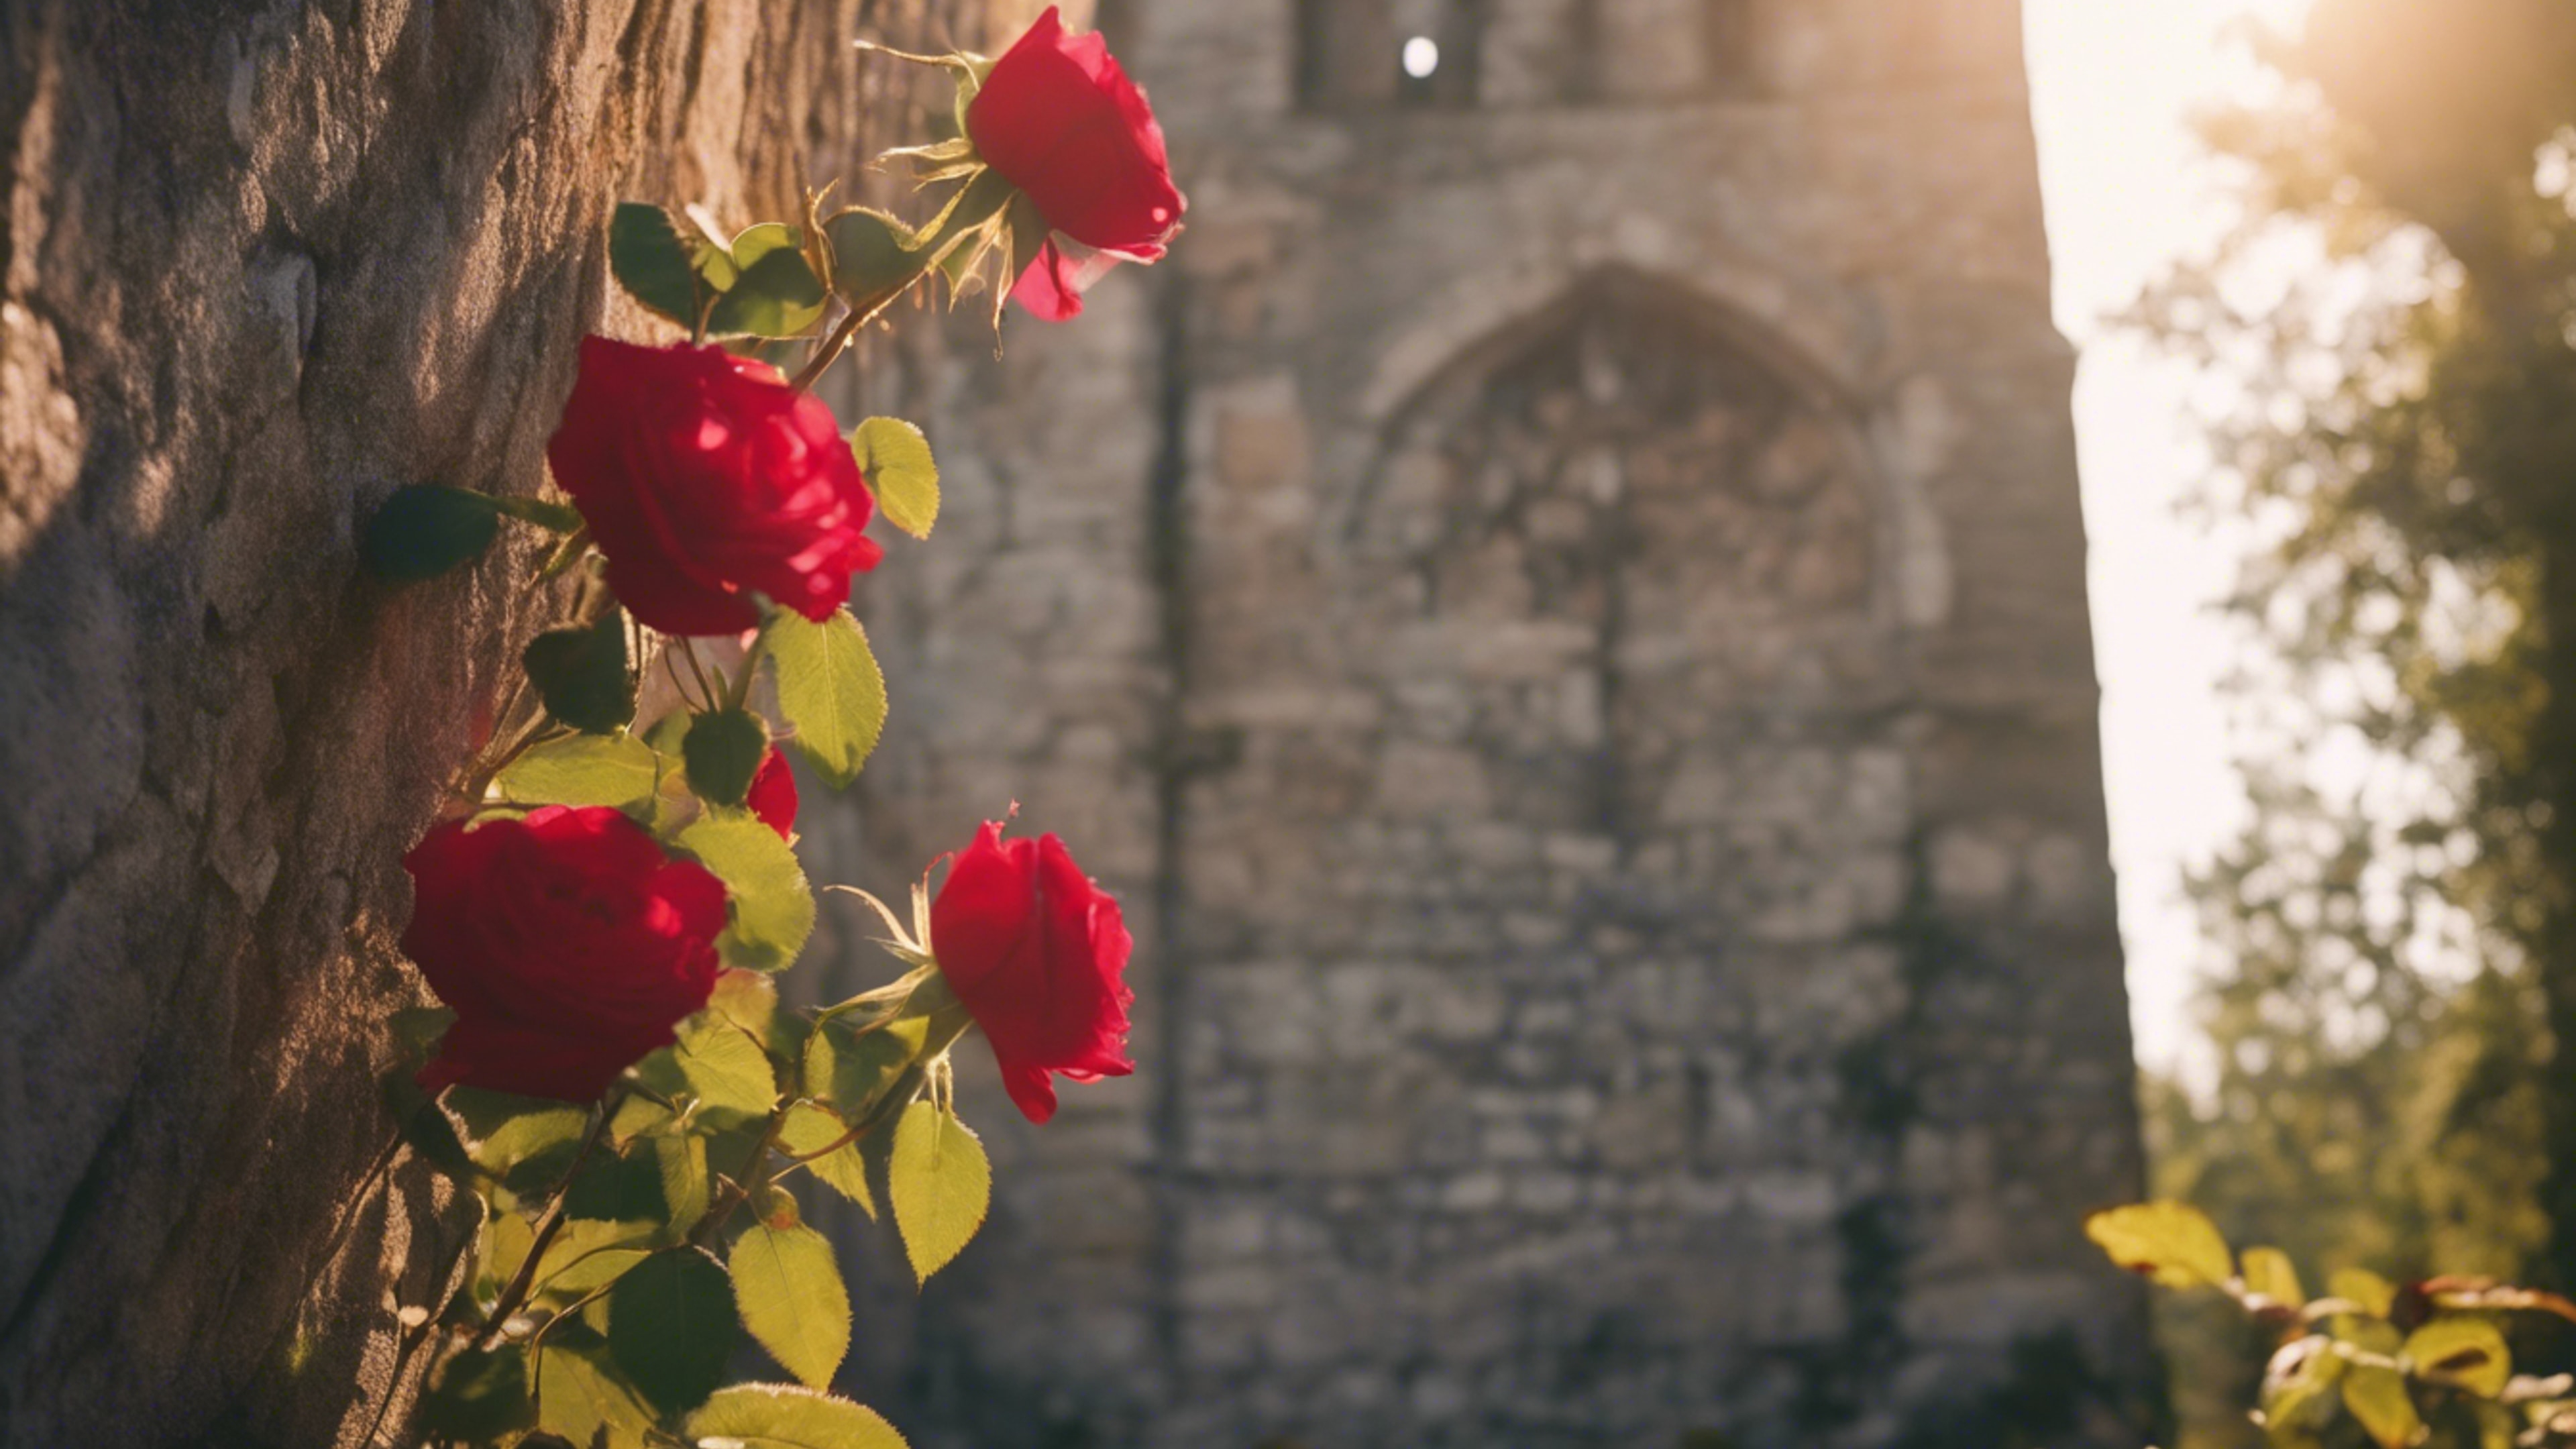 Wild red roses climbing the worn stone wall of an abandoned Gothic tower, the scenery bathed in soft, golden sunlight.壁紙[e7fe6c543bfa4d12bc39]